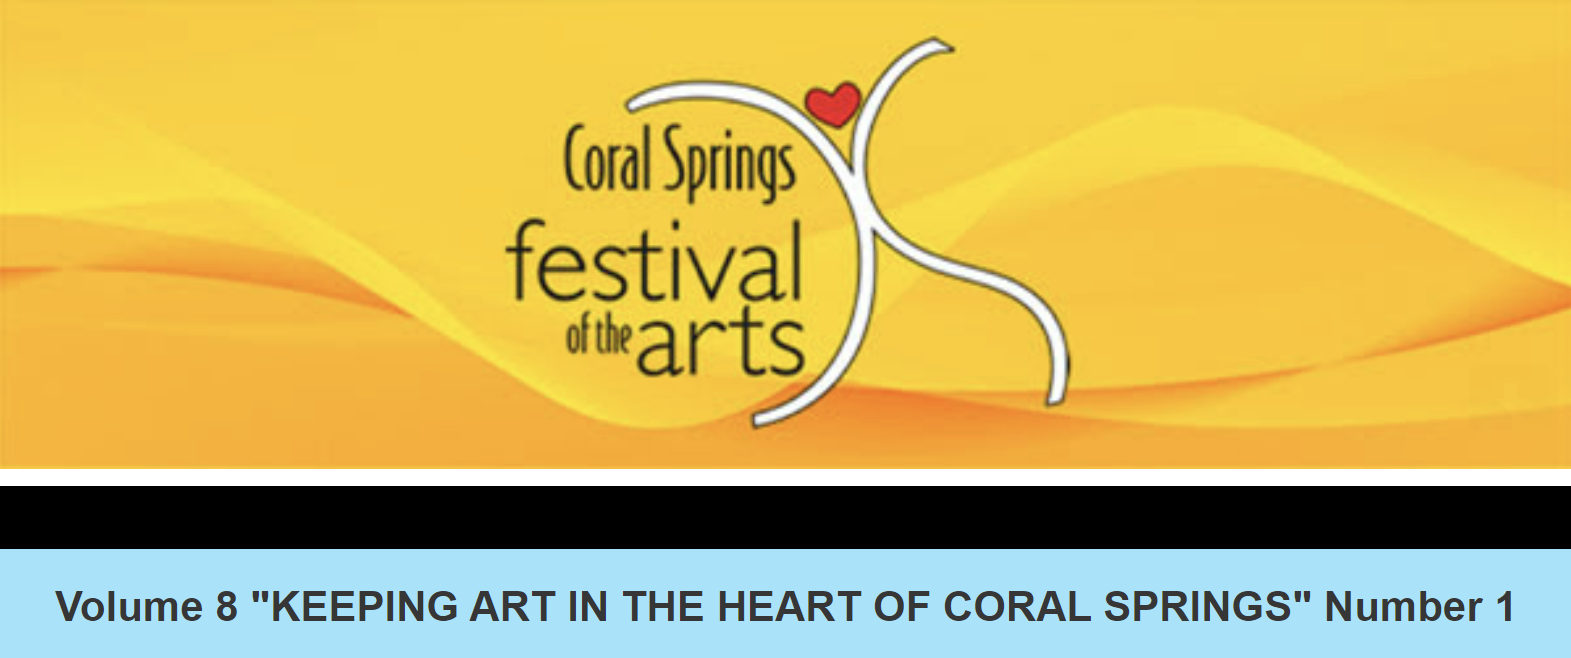 Call for Signature Artist Submissions for Coral Springs Festival of the Arts